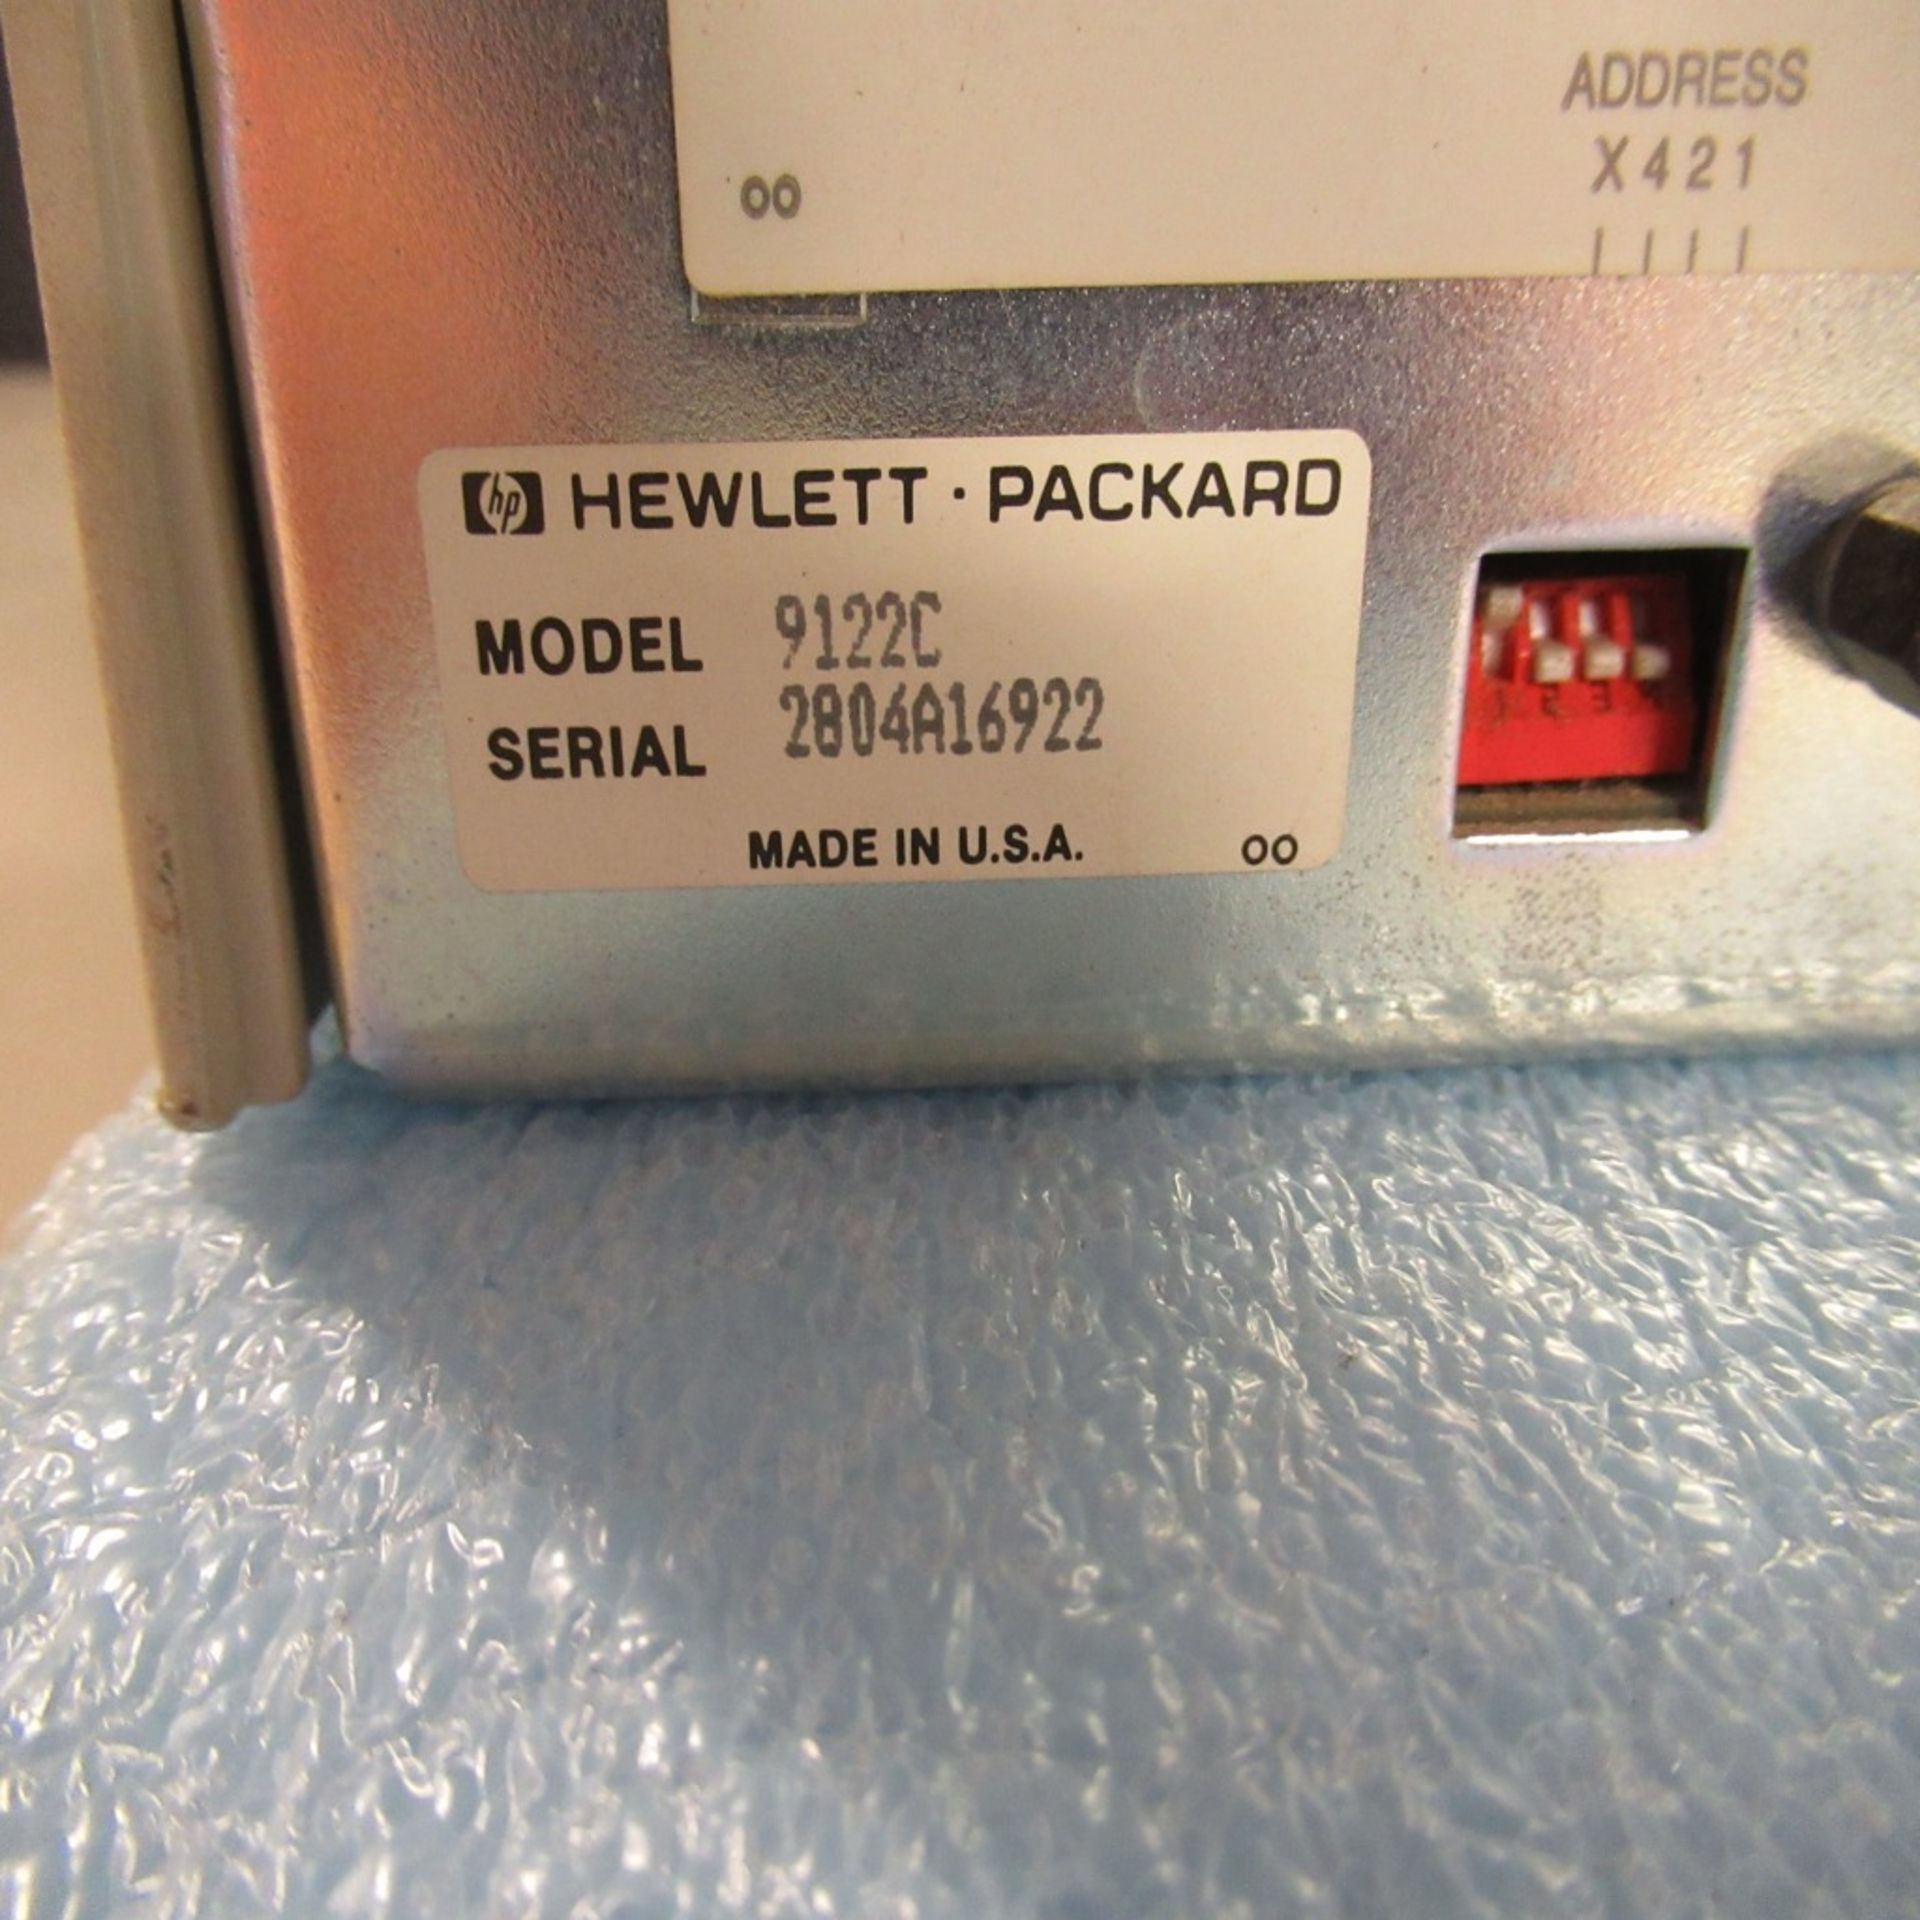 PHOTON SNAP SHOT MODEL 6000 *POWERS ON* NO SCREEN DISPLAY; FARNELL AP20-80 REGULATED POWER SUPPLY * - Image 204 of 222